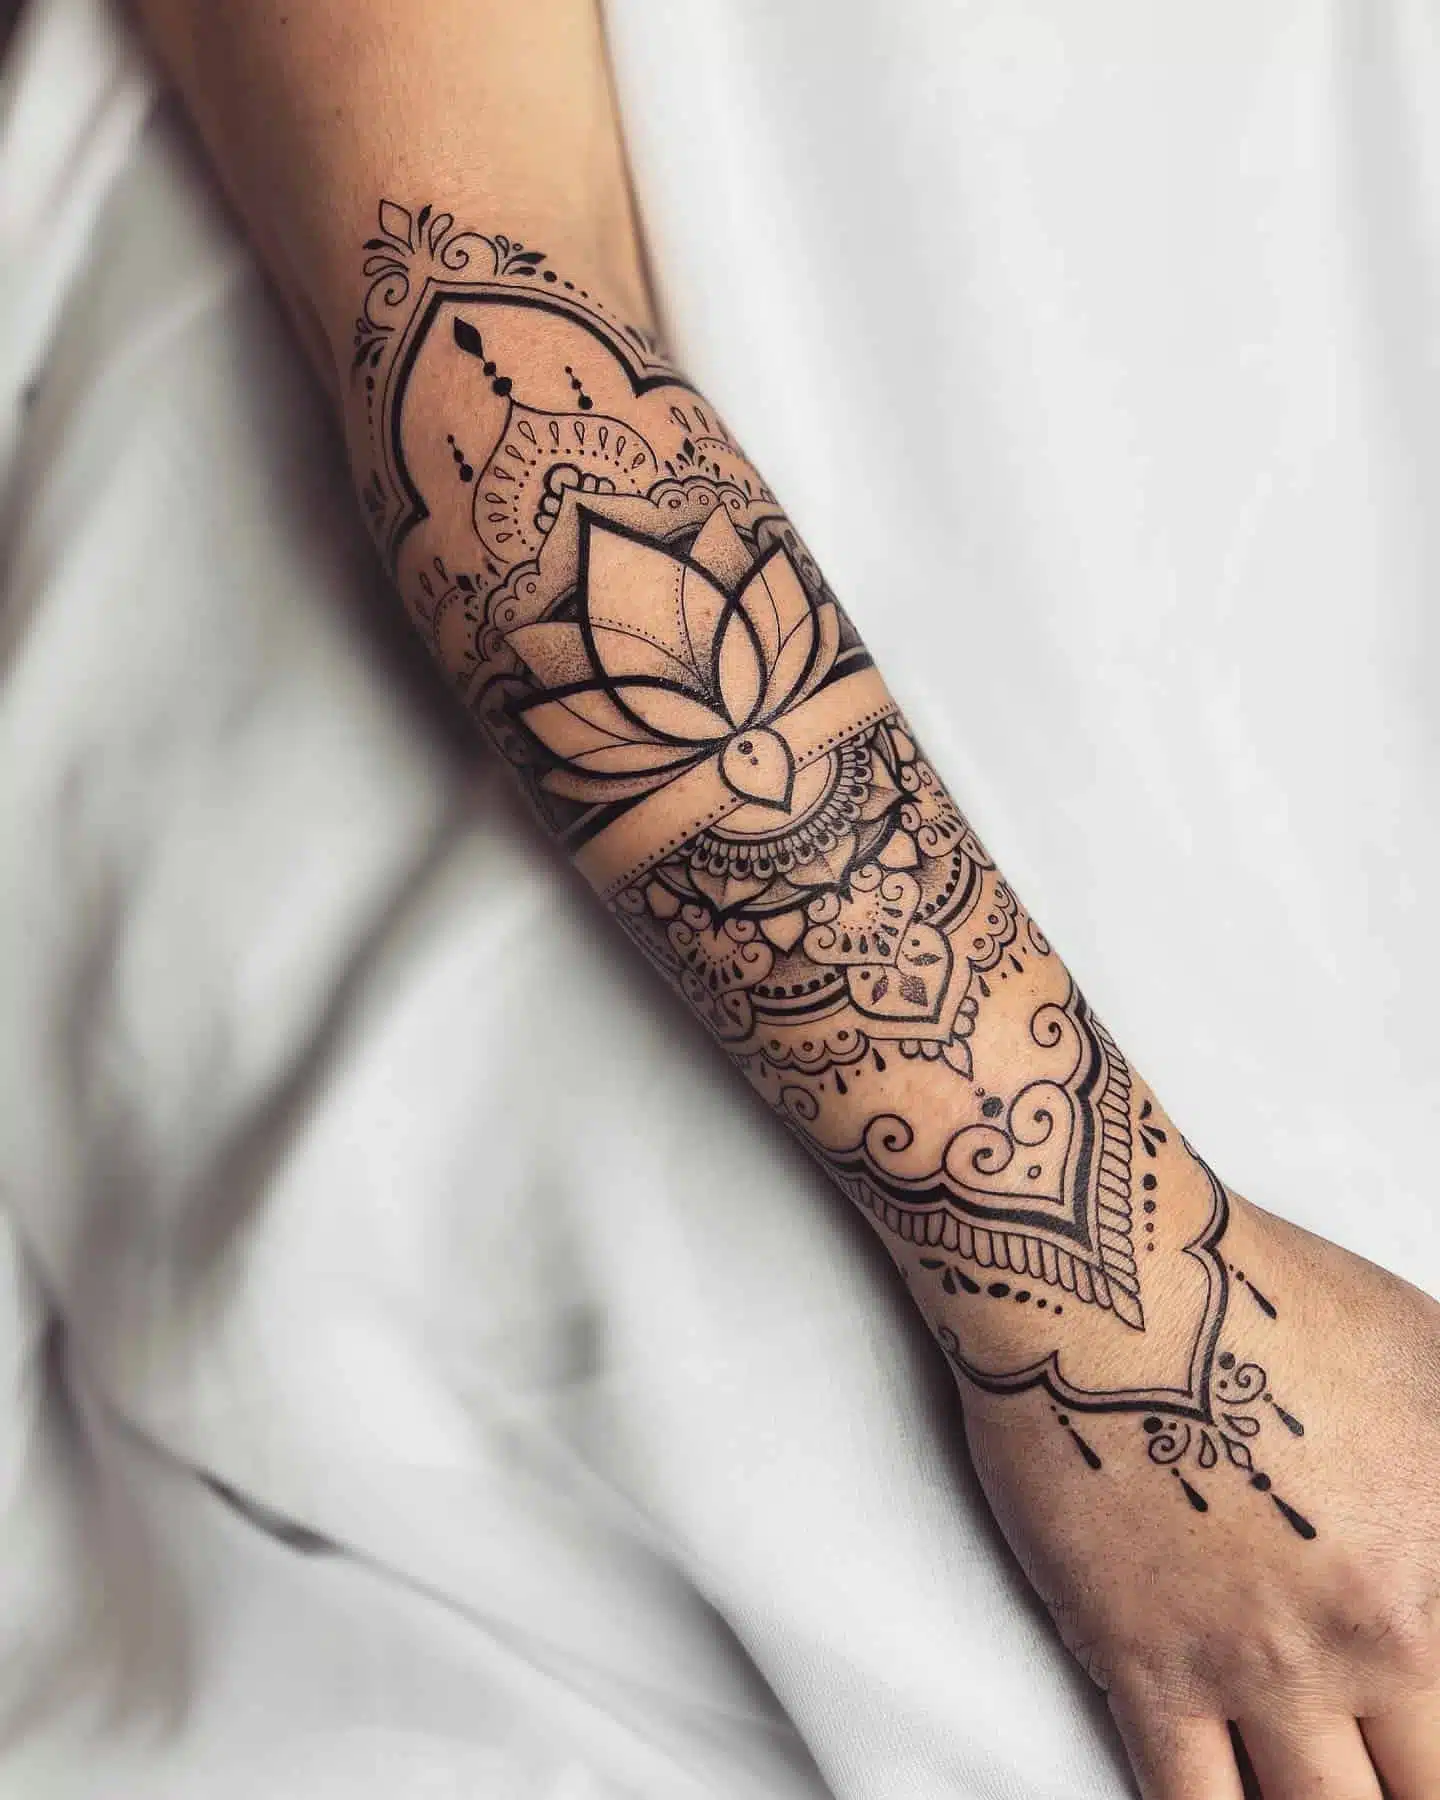 200+ Forearm Tattoos For Women Who Want Their Style Upgraded